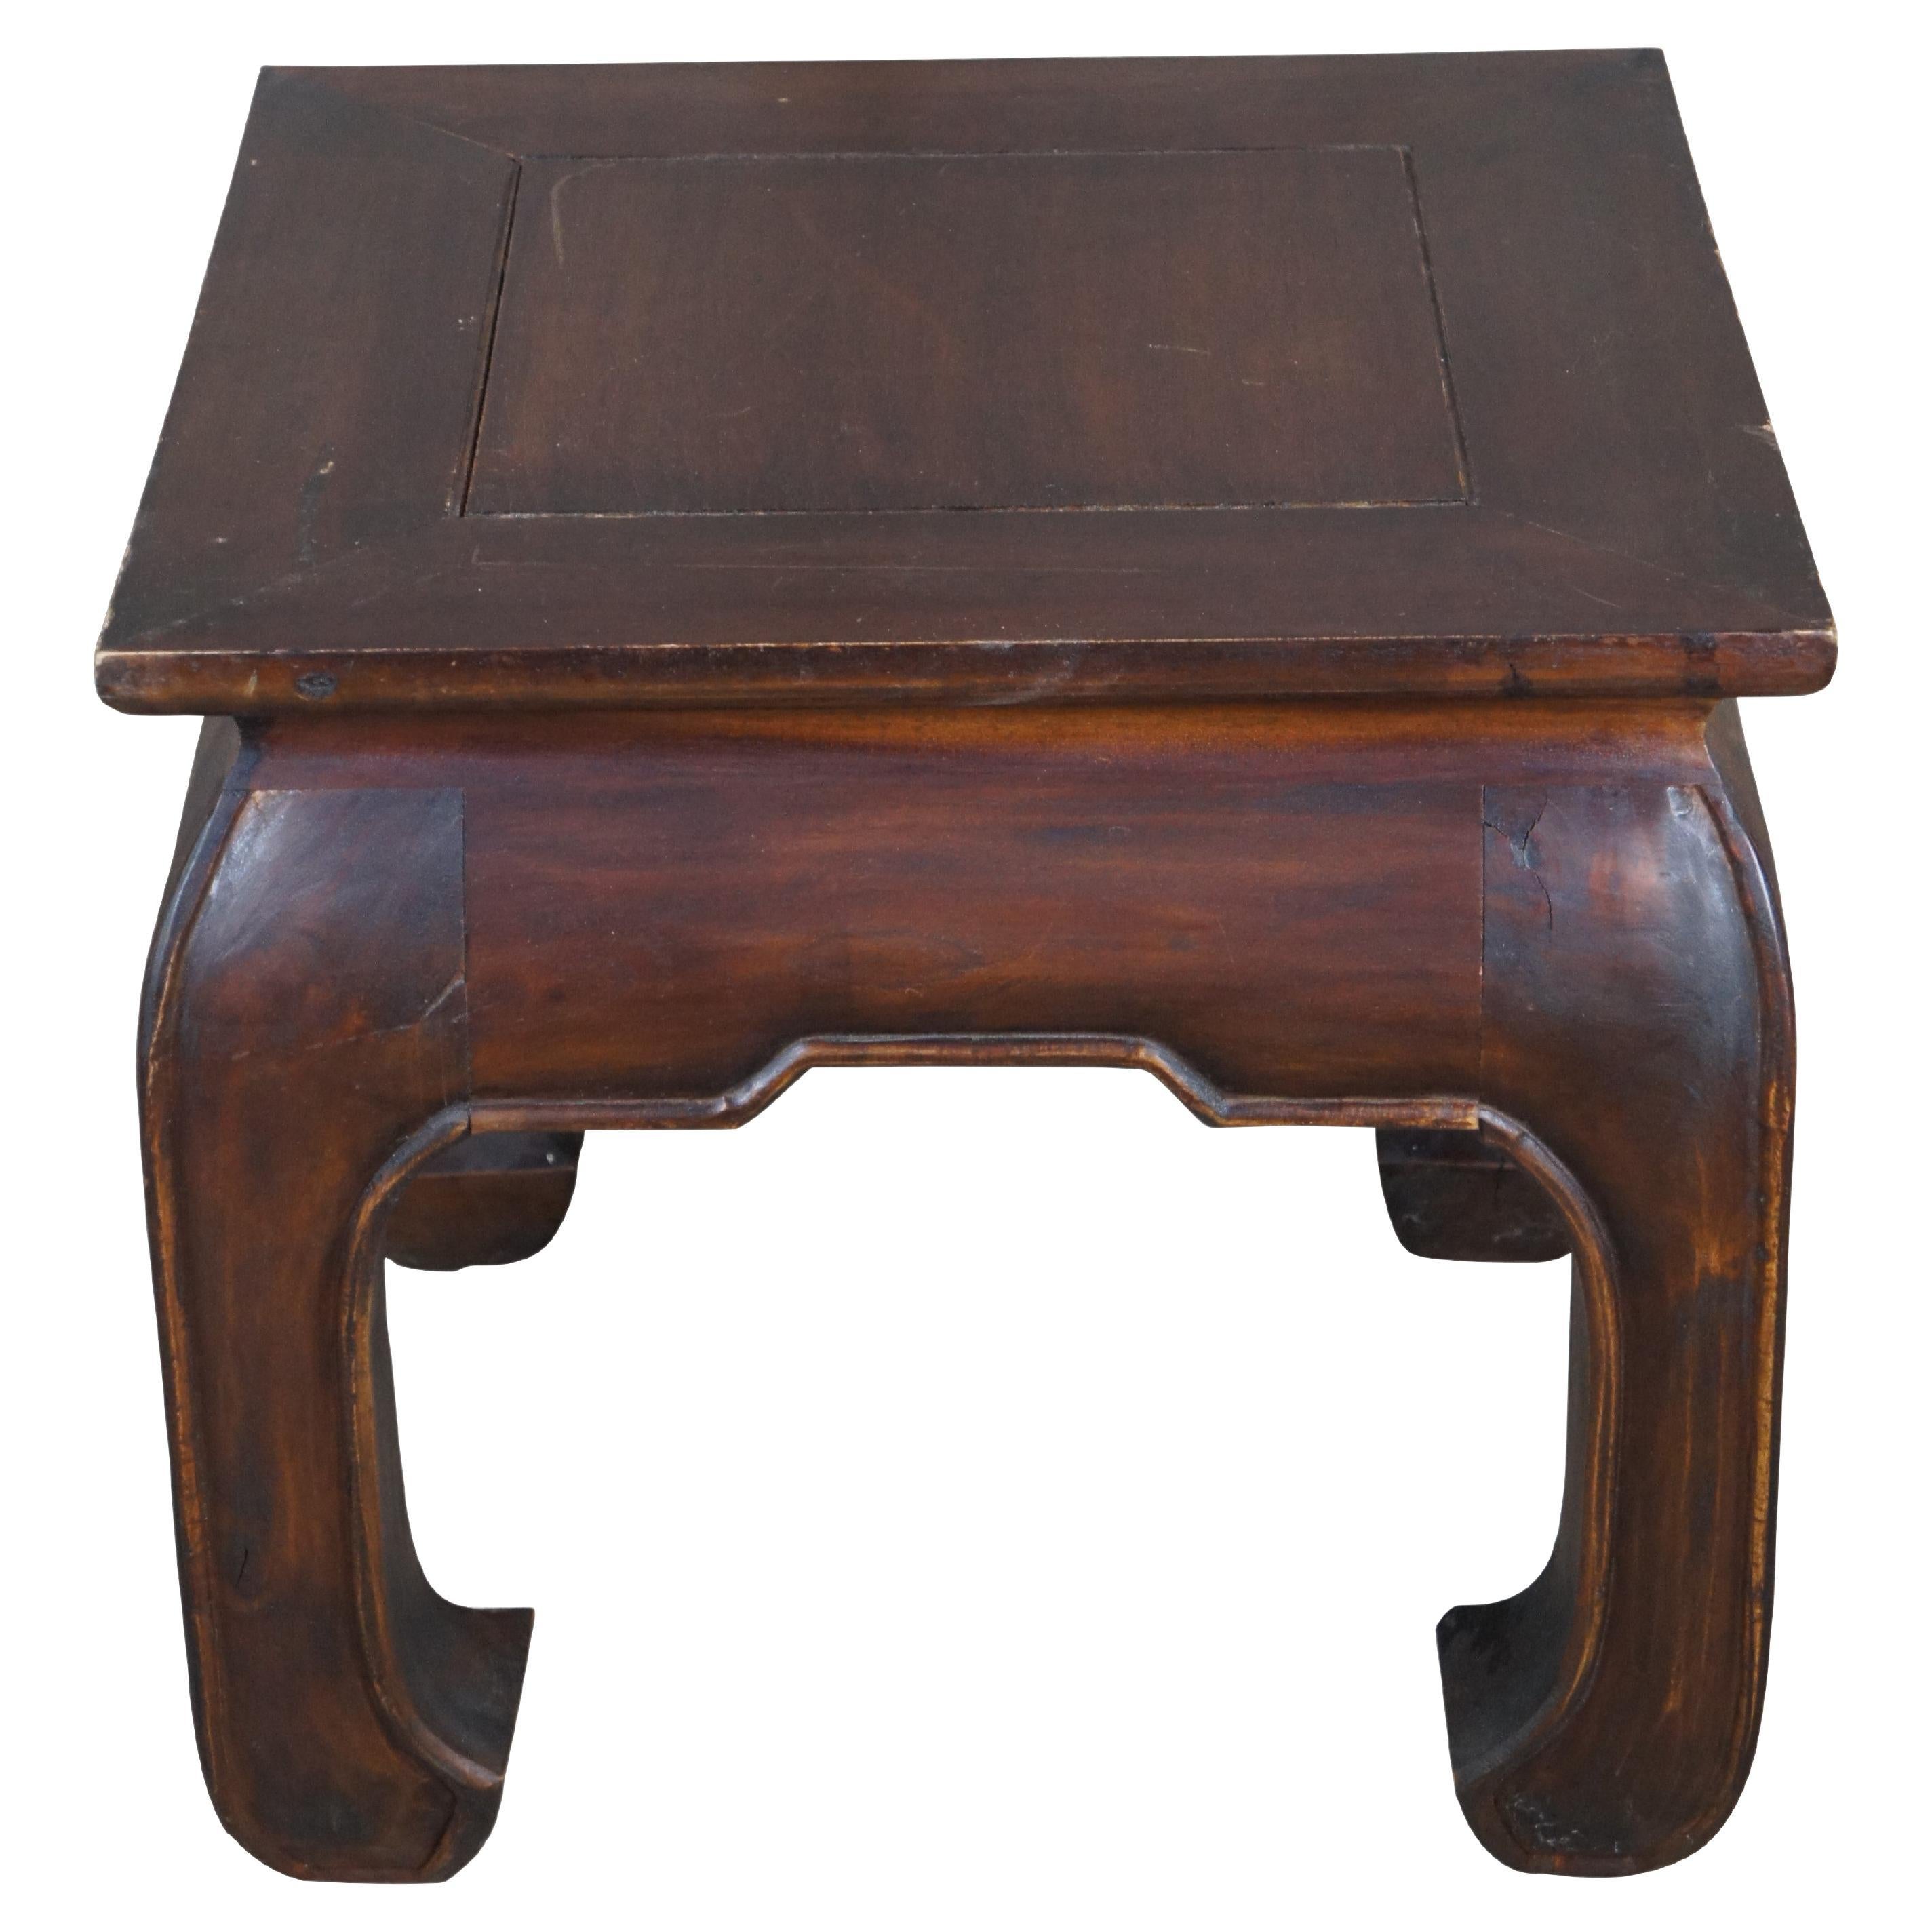 20th Century Chinese Ming Style Teak Square Side Table Sculpture Stand Stool 18" For Sale